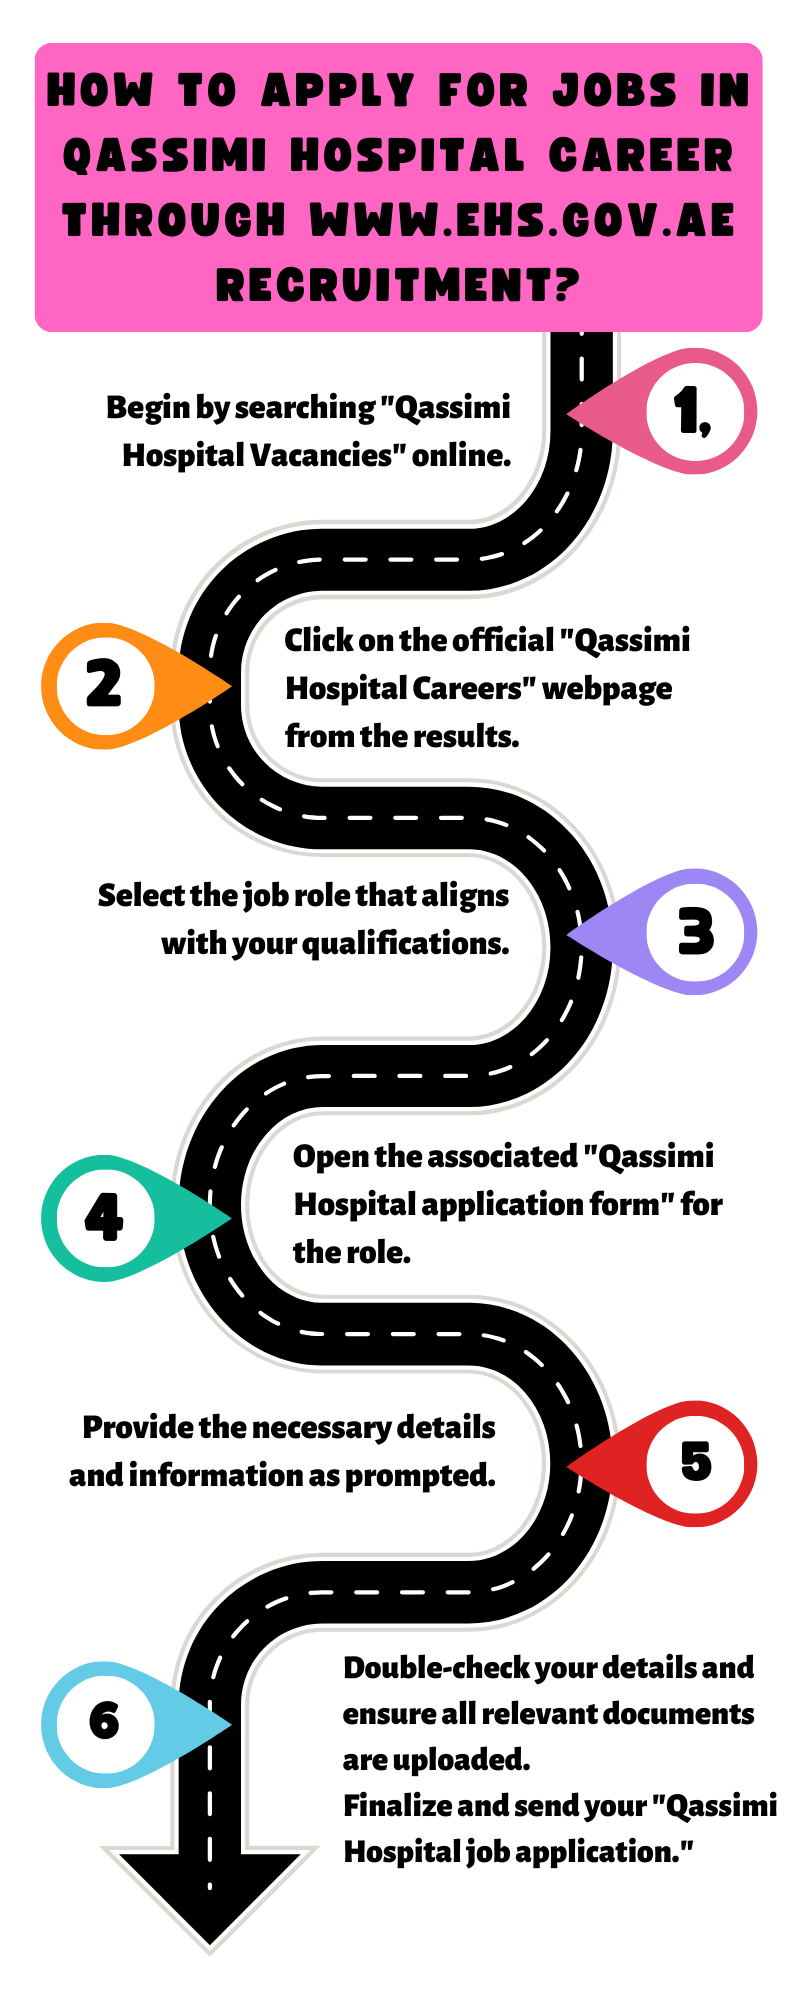 How to Apply for Jobs in Qassimi Hospital Career through www.ehs.gov.ae recruitment?